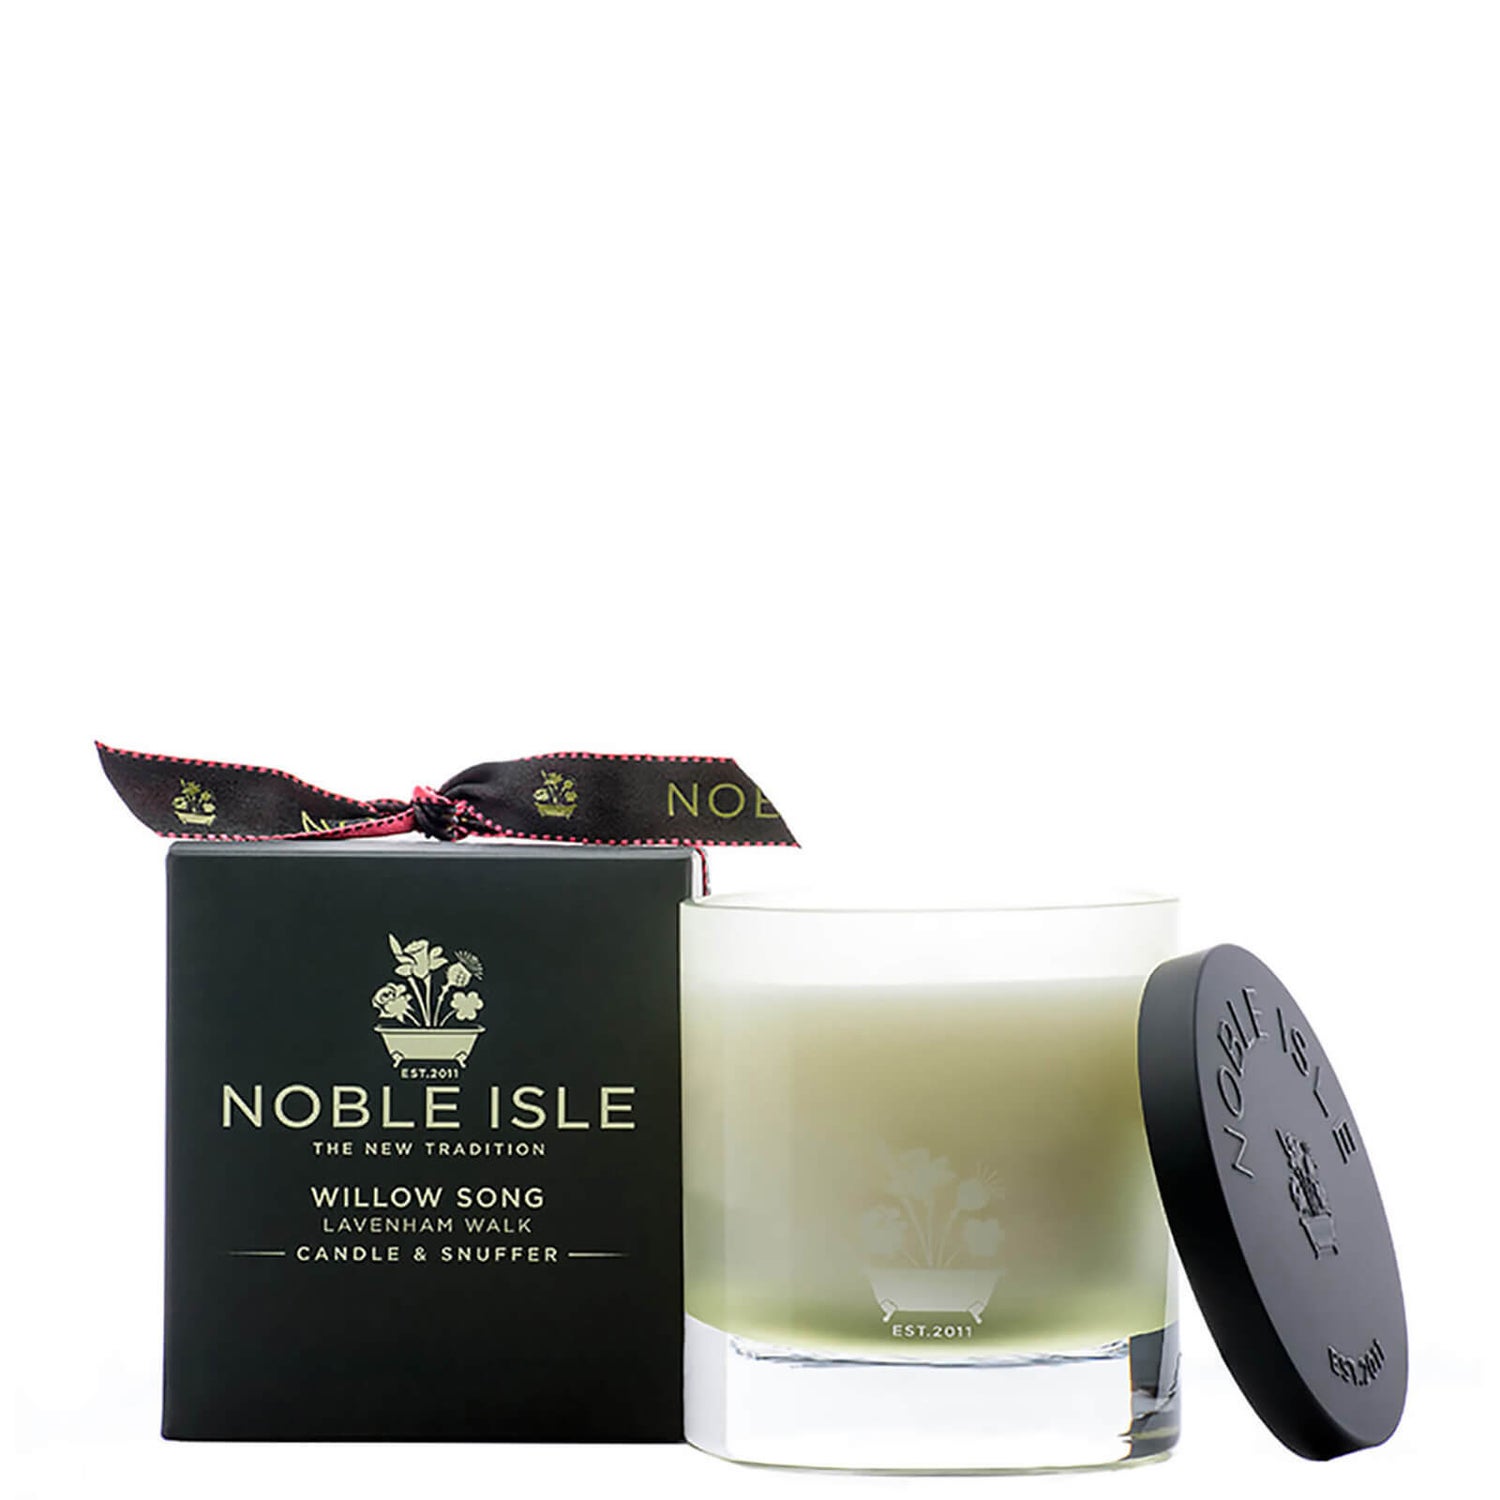 Noble Isle Willow Song Candle & Snuffer